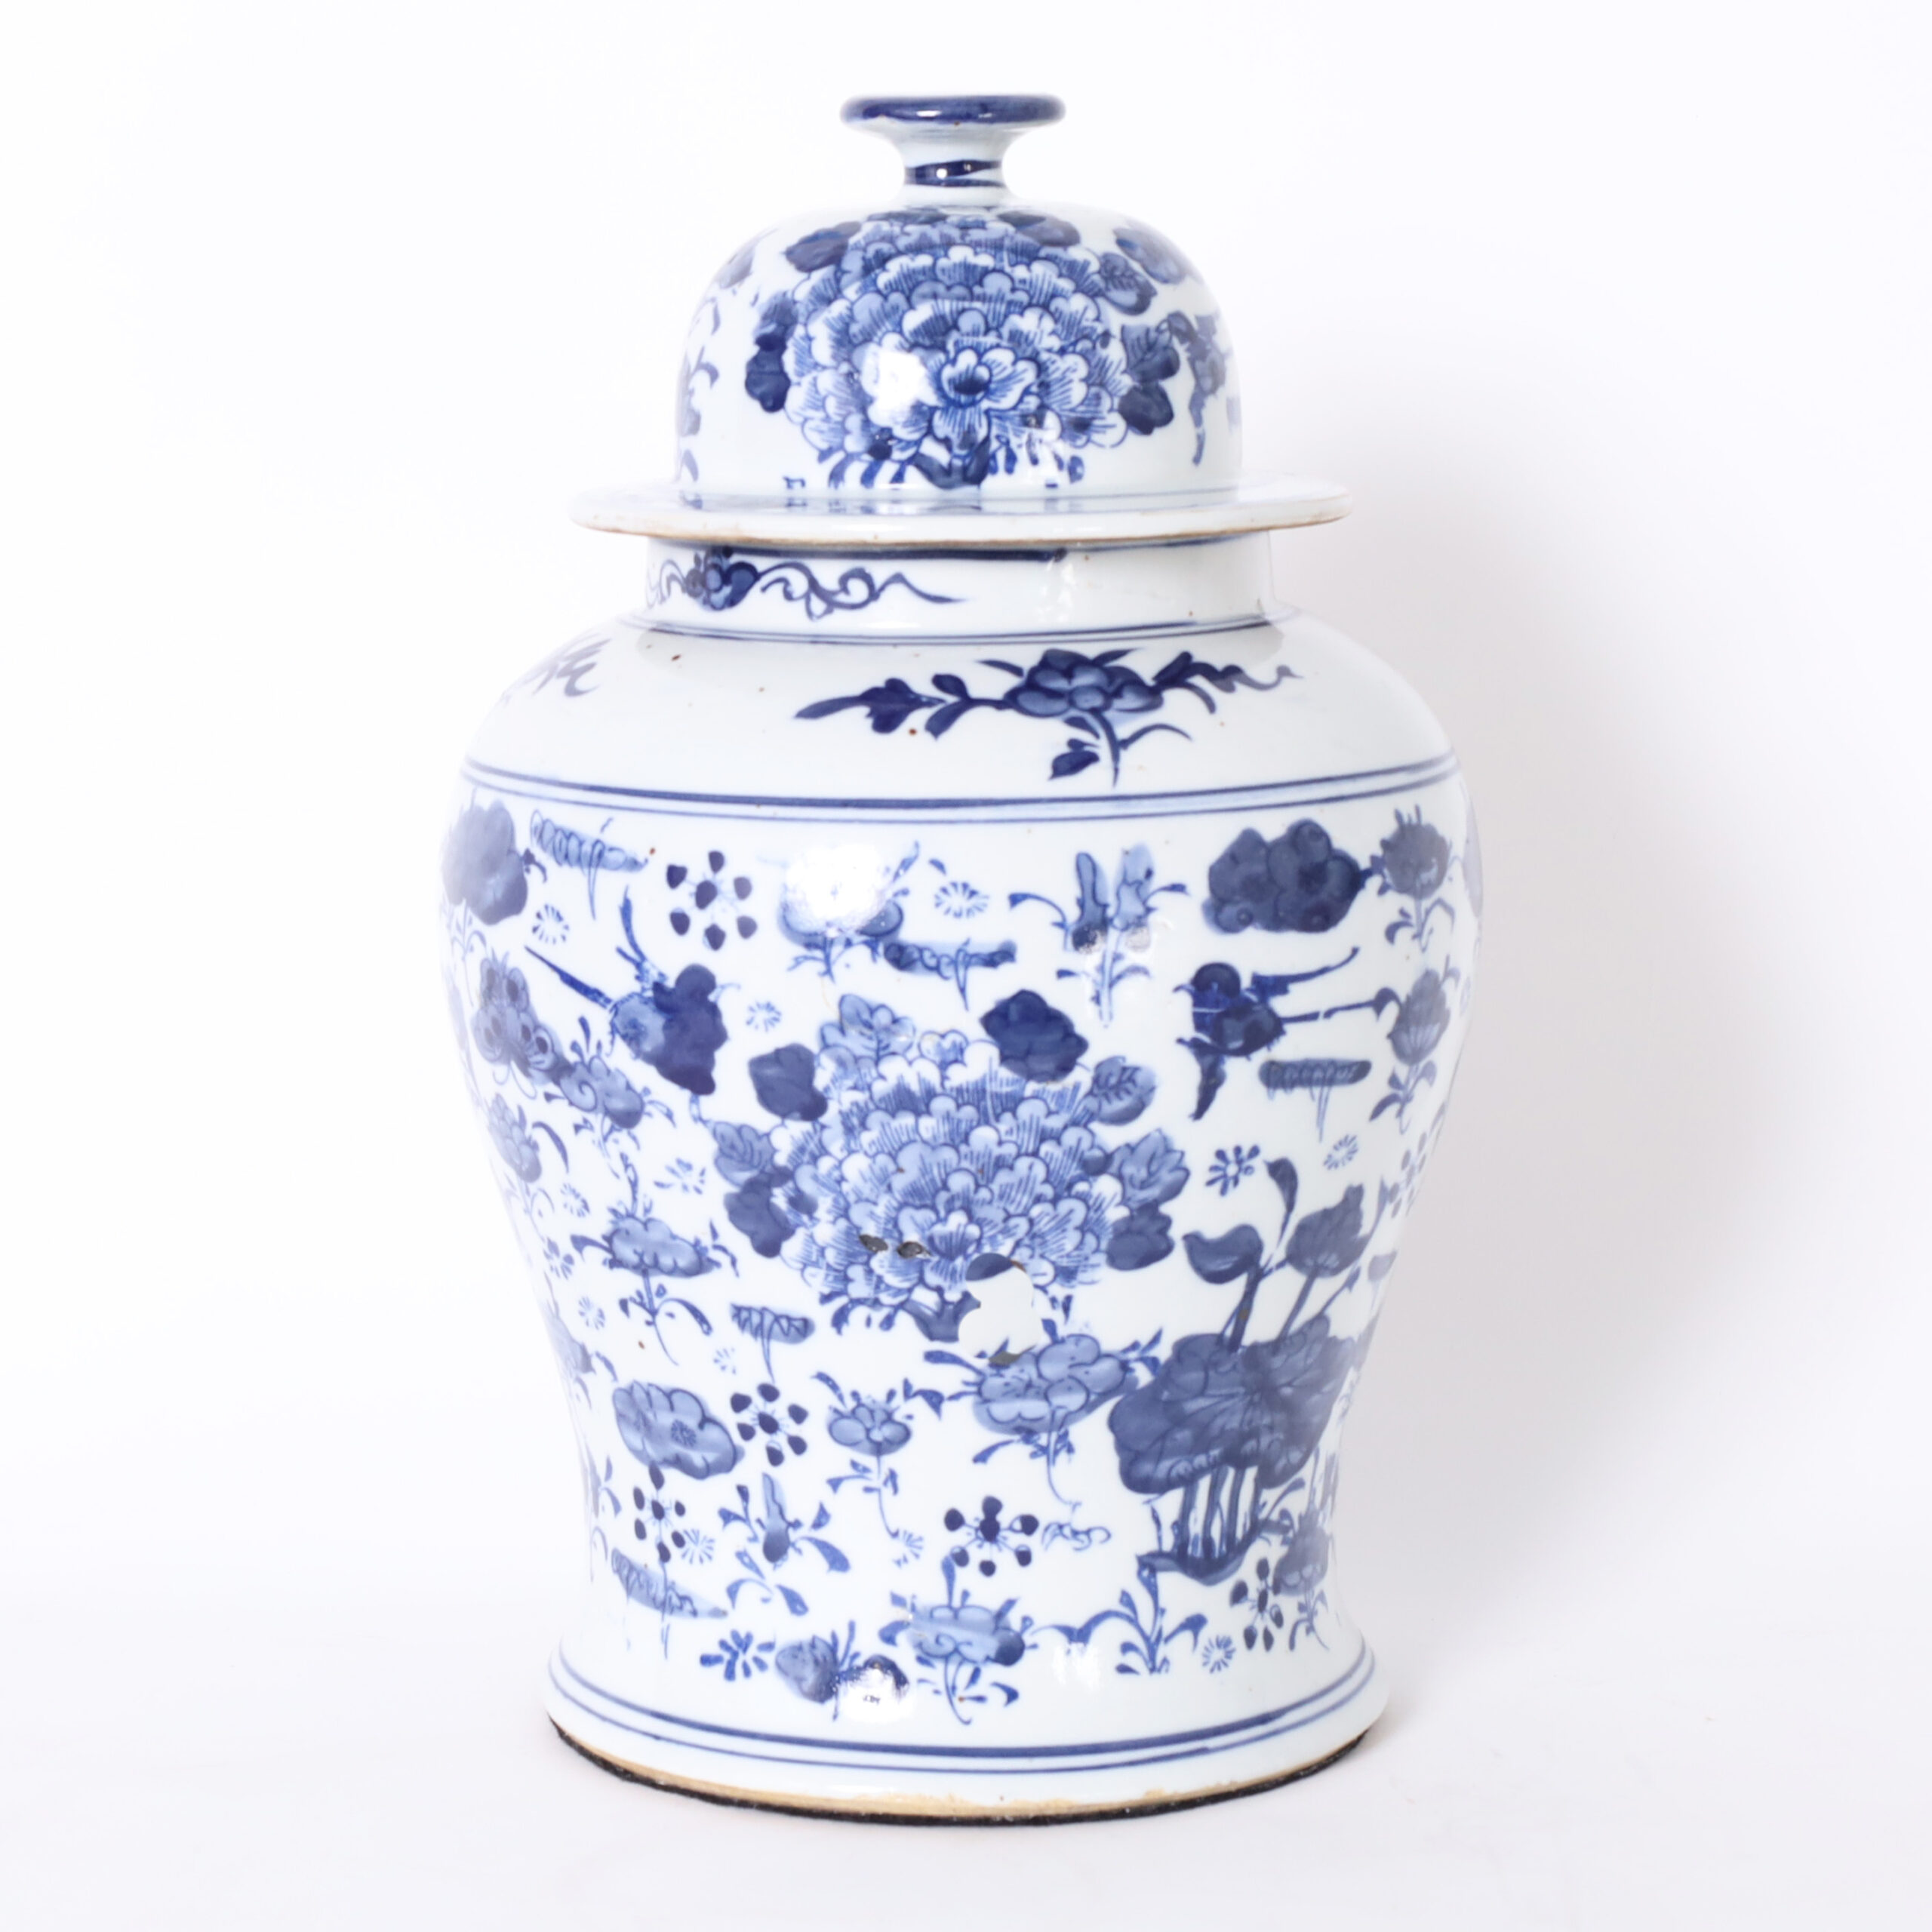 Pair of Chinese Blue and White Porcelain Ginger Jars with Birds and Flowers